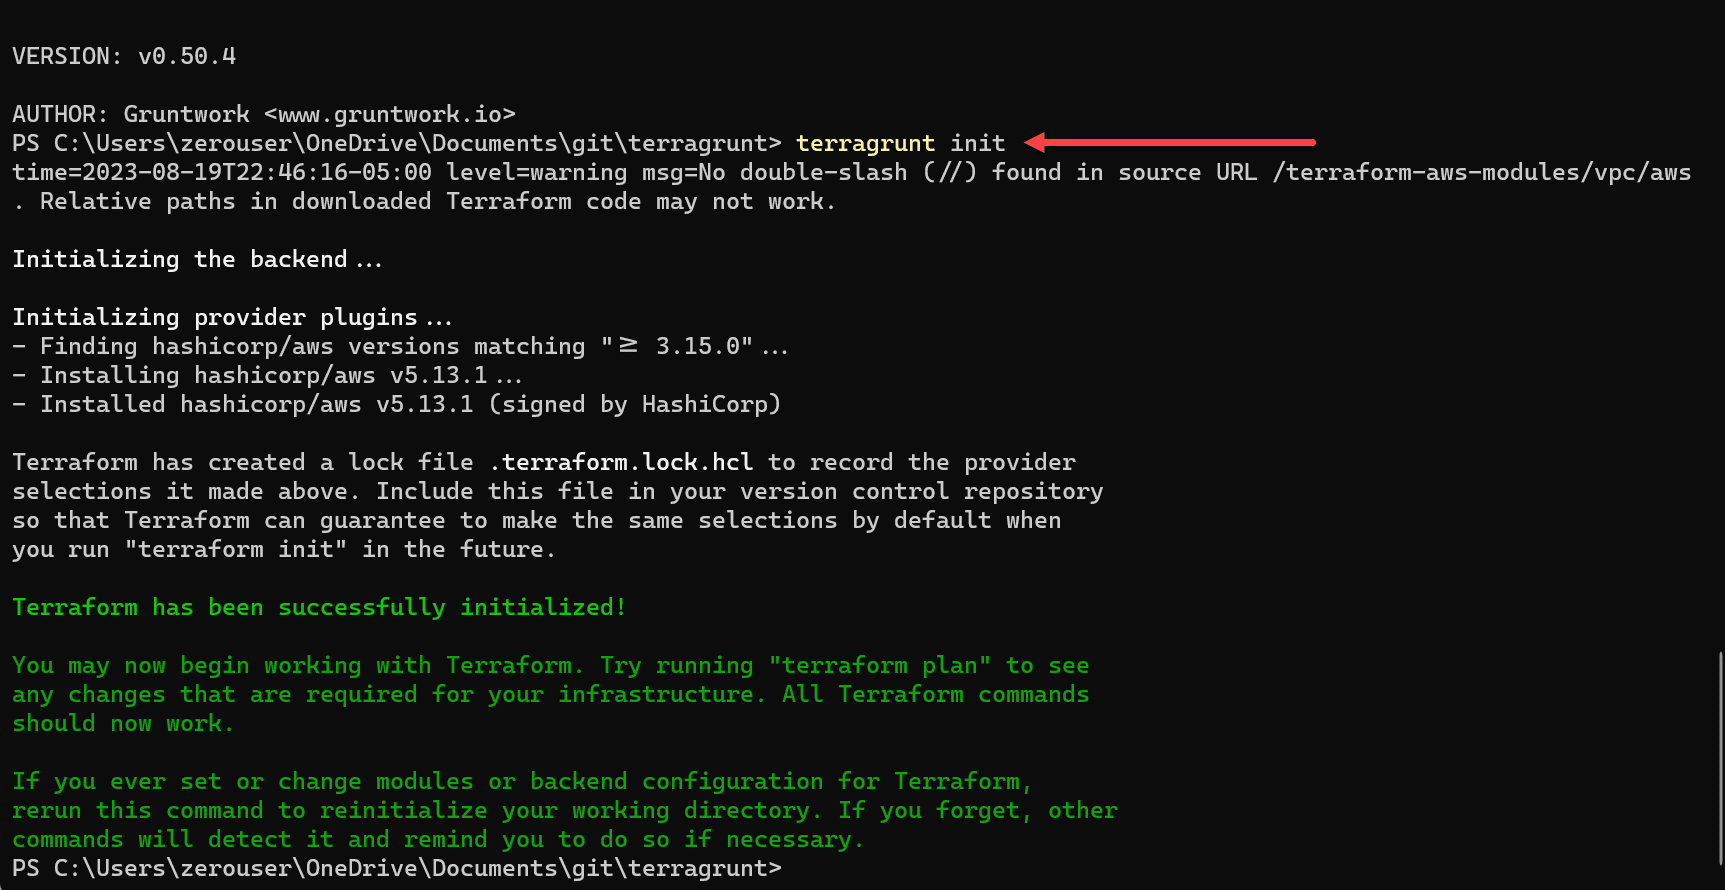 Running terragrunt init from the command line